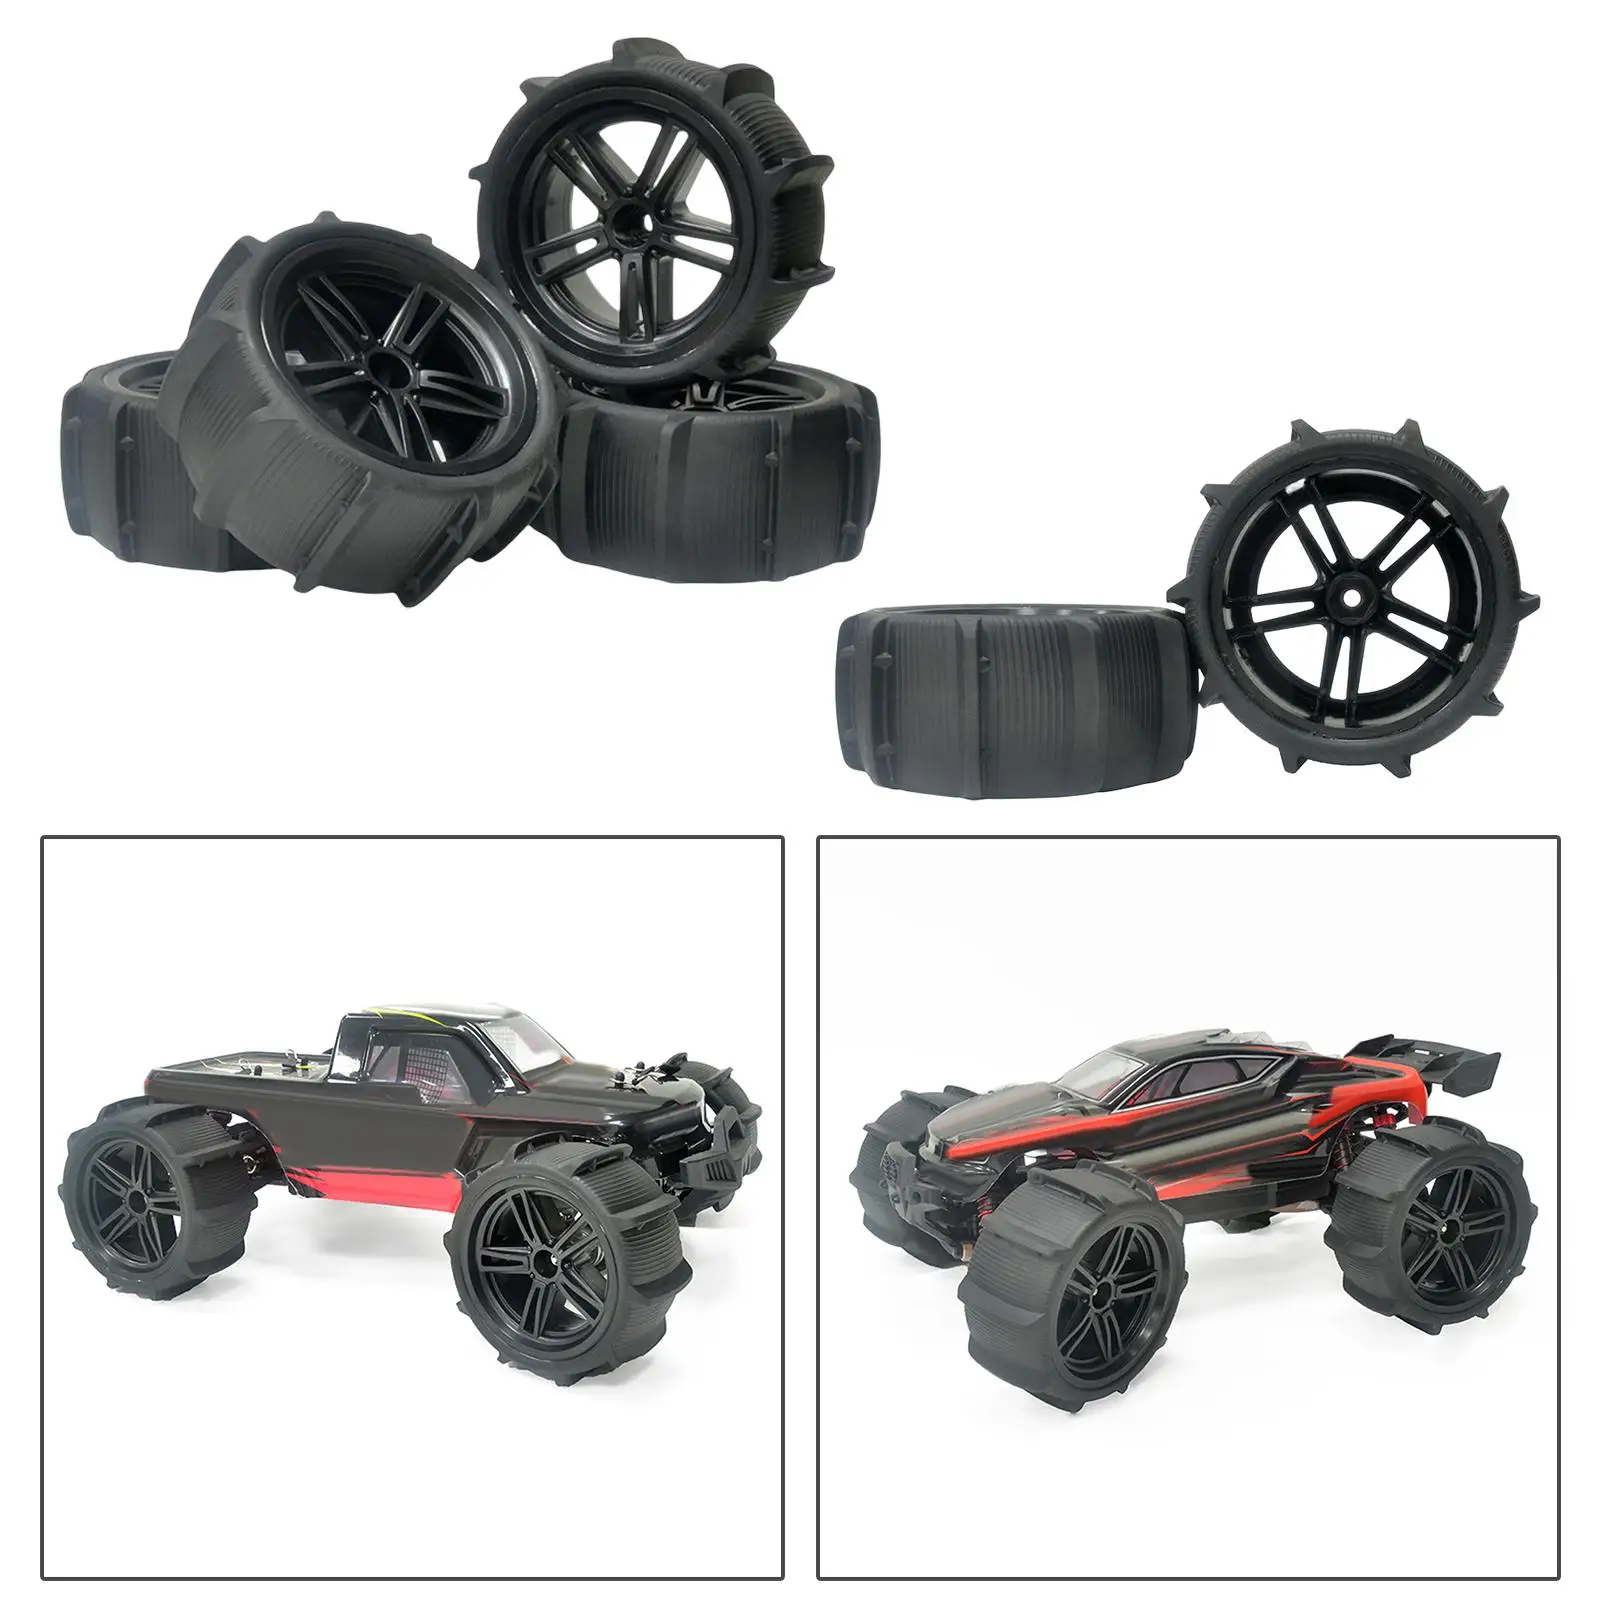 1:10 Scale RC Sand Wheel Tires Replaces Upgrade Parts for DIY Parts Crawler